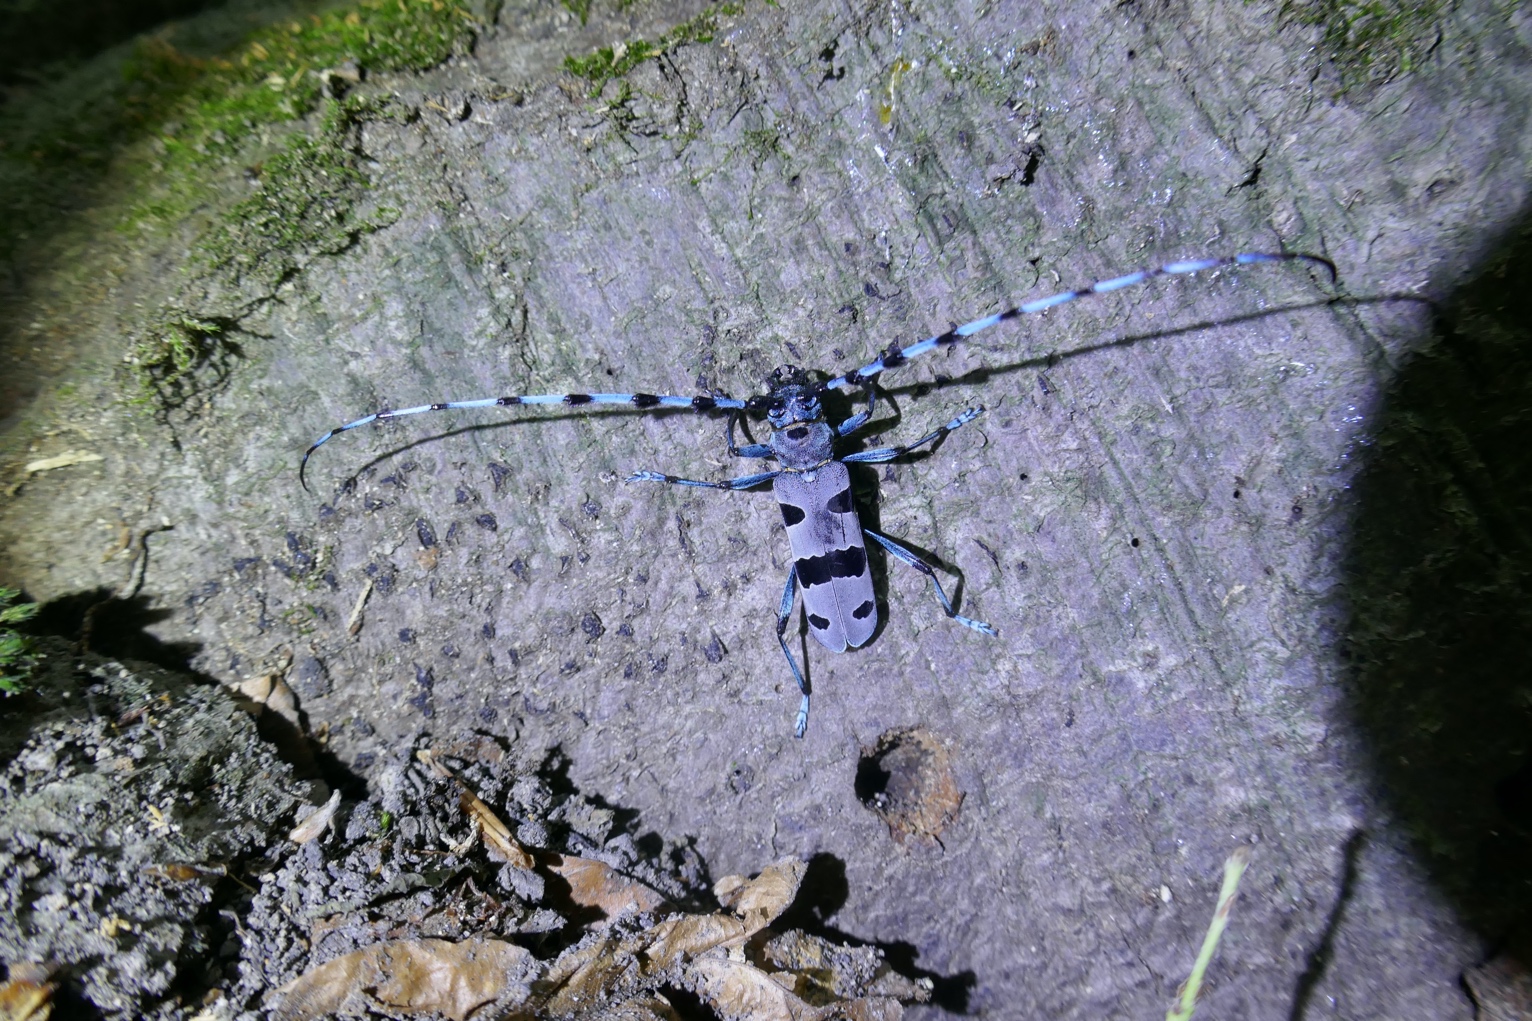 Photo of an Alpine Rosalia longhorn beetle at the base of a tree. Long, thick blue and black striped antennae, each as long as the beetle itself. A long rectangular body, blue with black markings